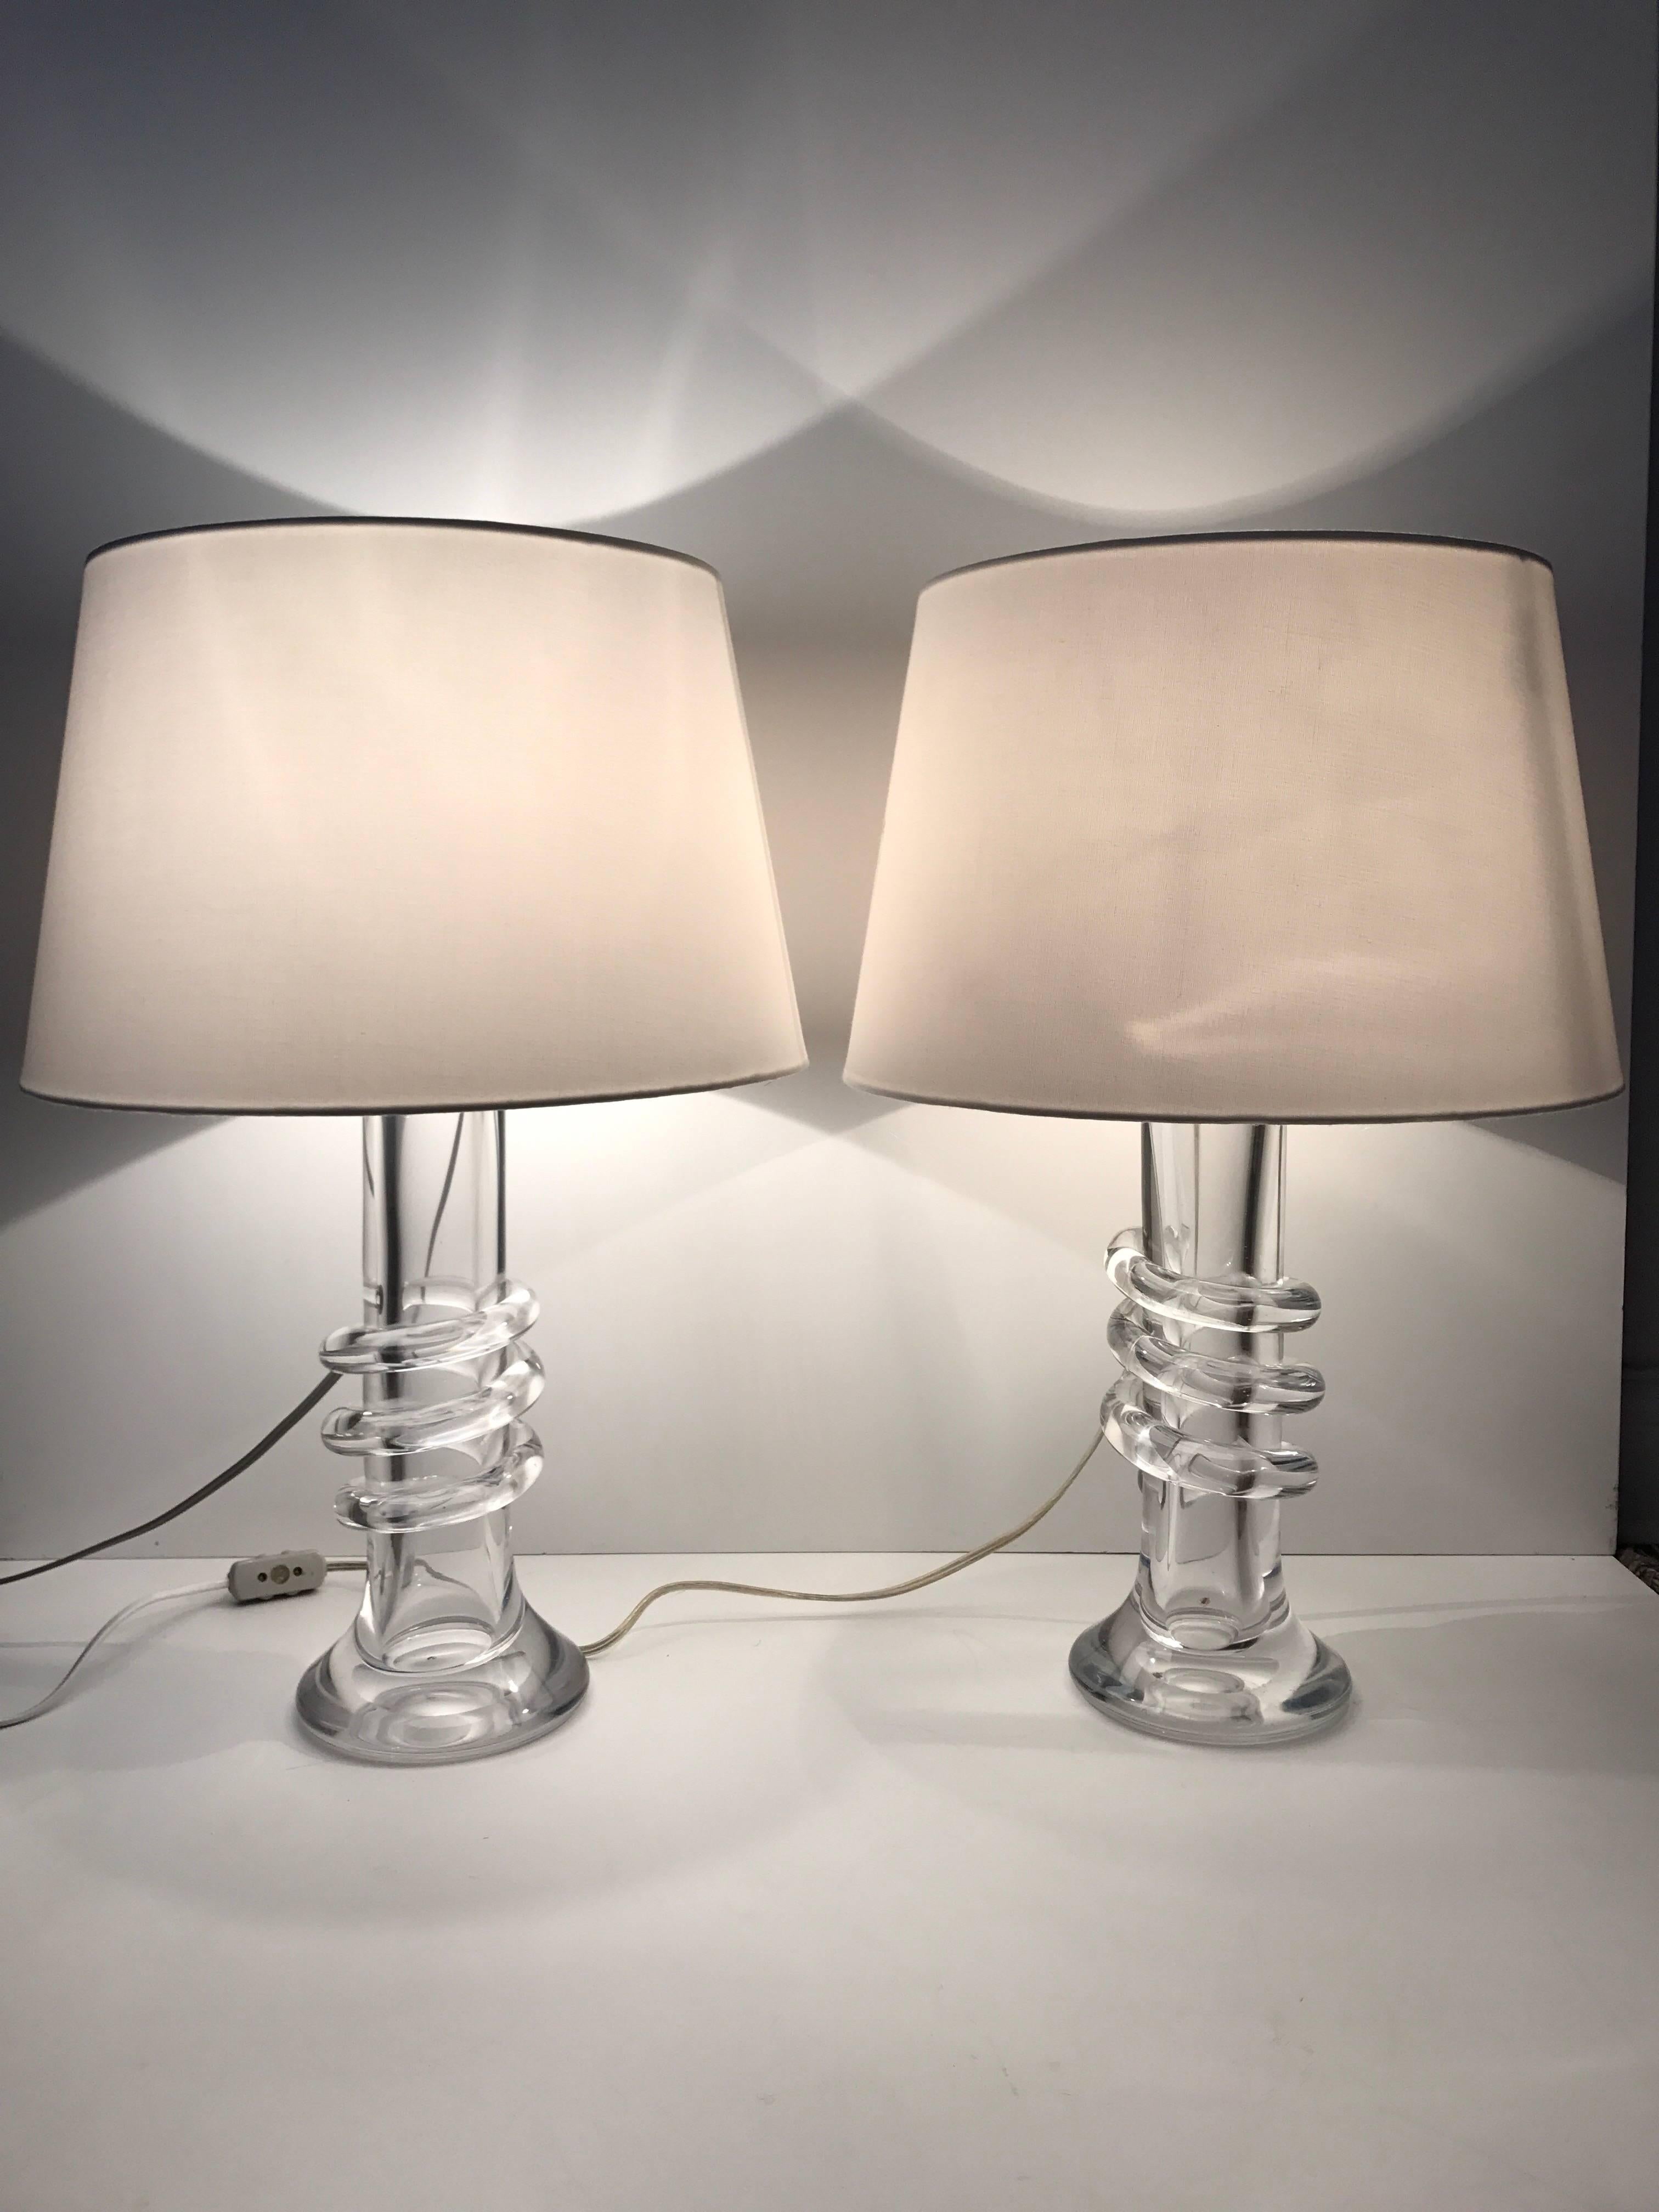 Pair of Swedish art glass table lamps by Hannelore Dreutler for Ateljé Lyktan Åhus.
A very beautiful pair of table lamps designed by Hannelore Dreutler for Ateljé Lyktan, circa 1980.
Handmade and blown art glass made by Arthur Zirnsack from the